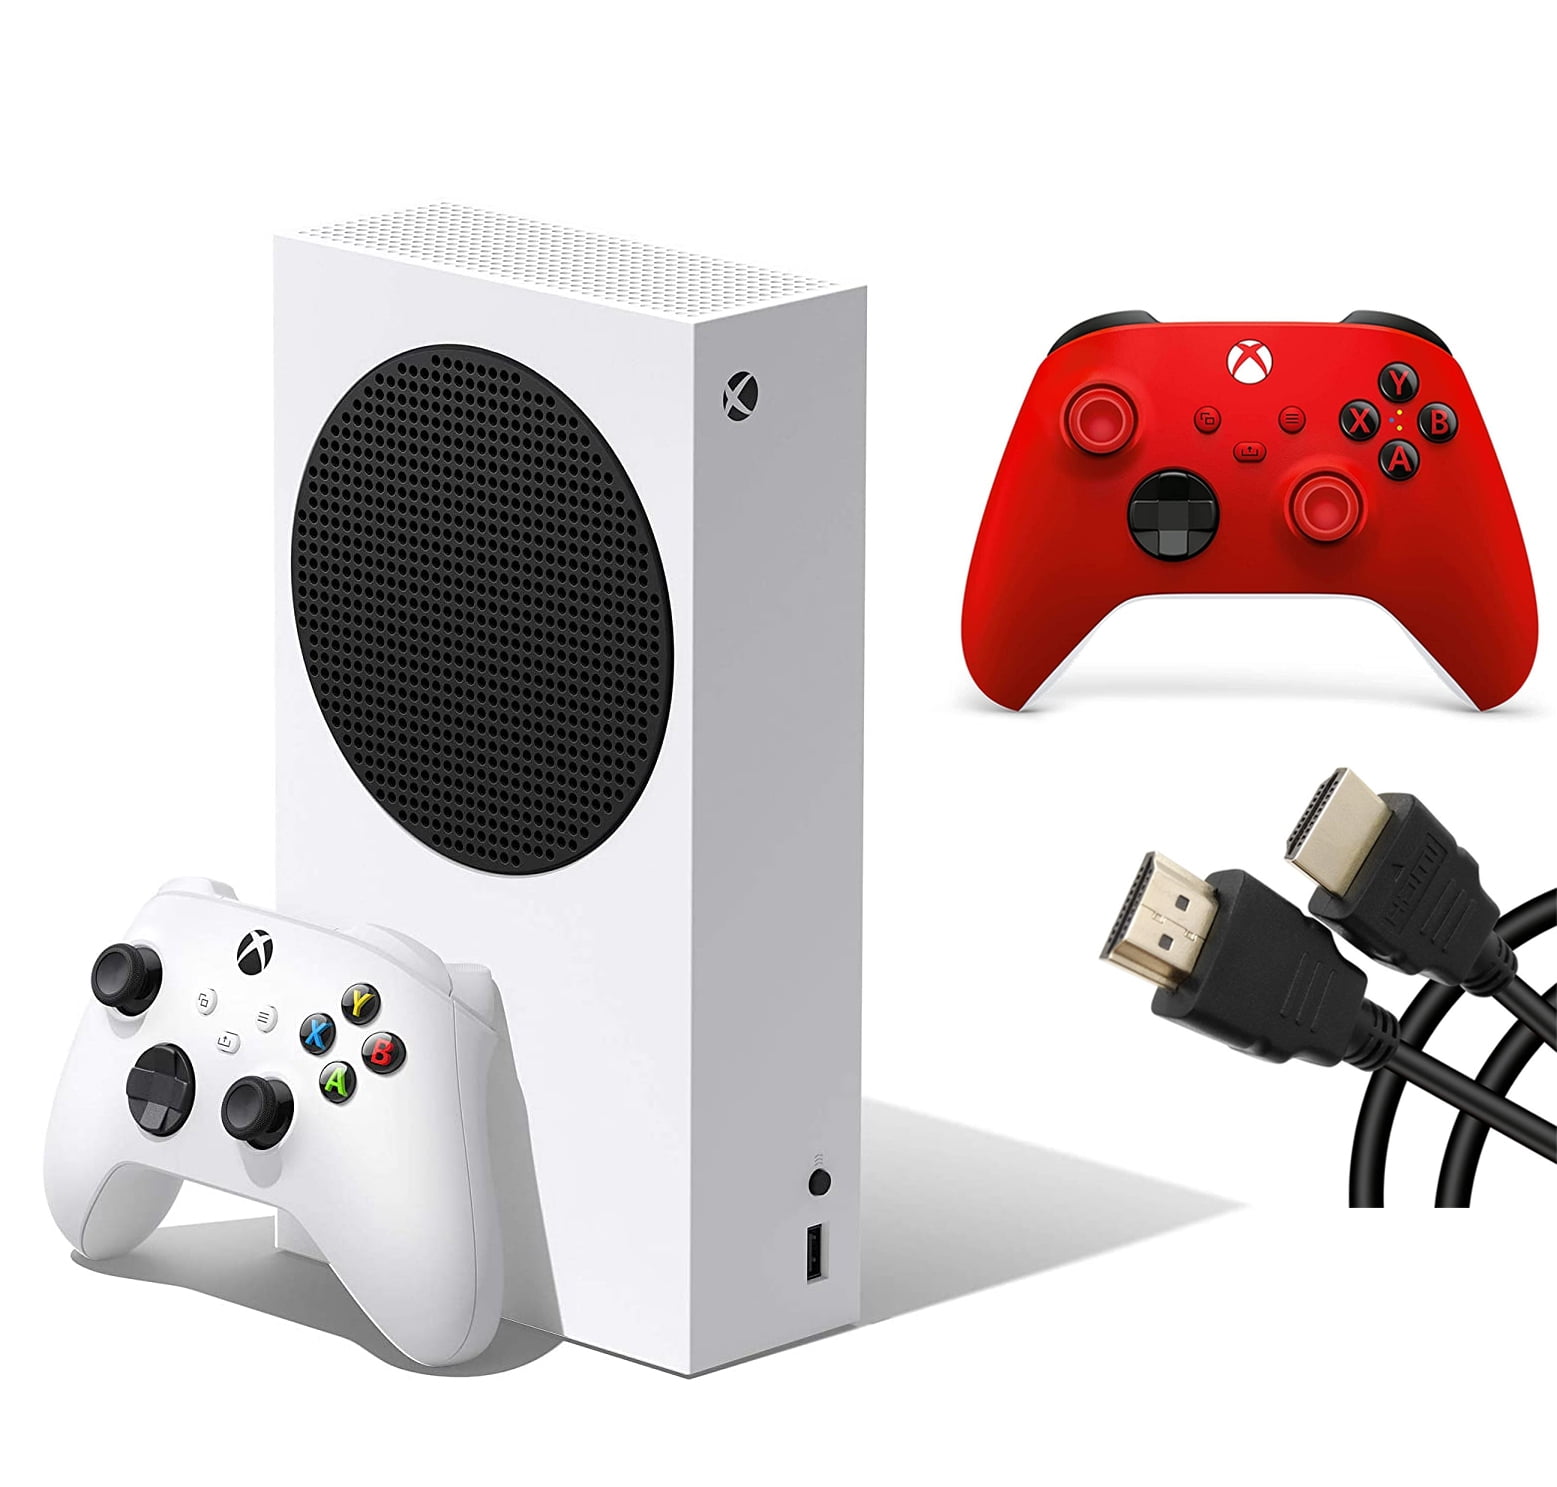 Buy Microsoft XBOX Series S Gaming Console - Computech Store